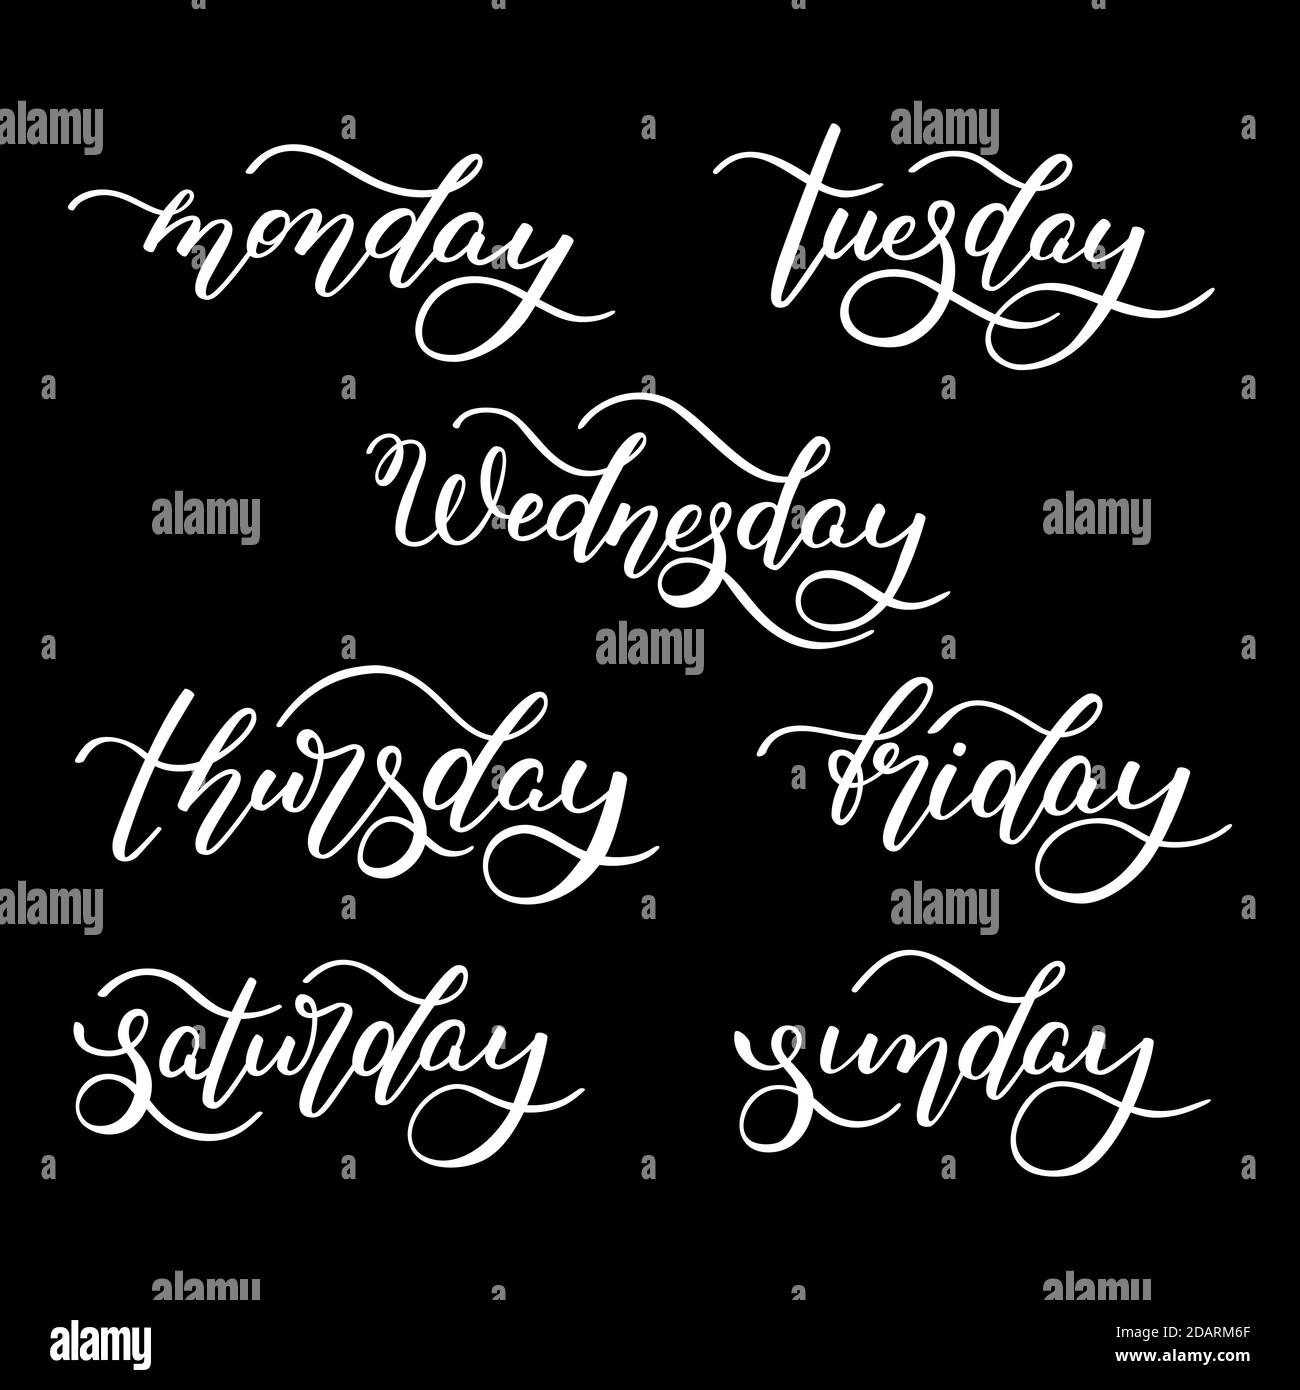 Lettering Days Of The Week Monday Tuesday Wednesday Thursday Friday Saturday Sunday 